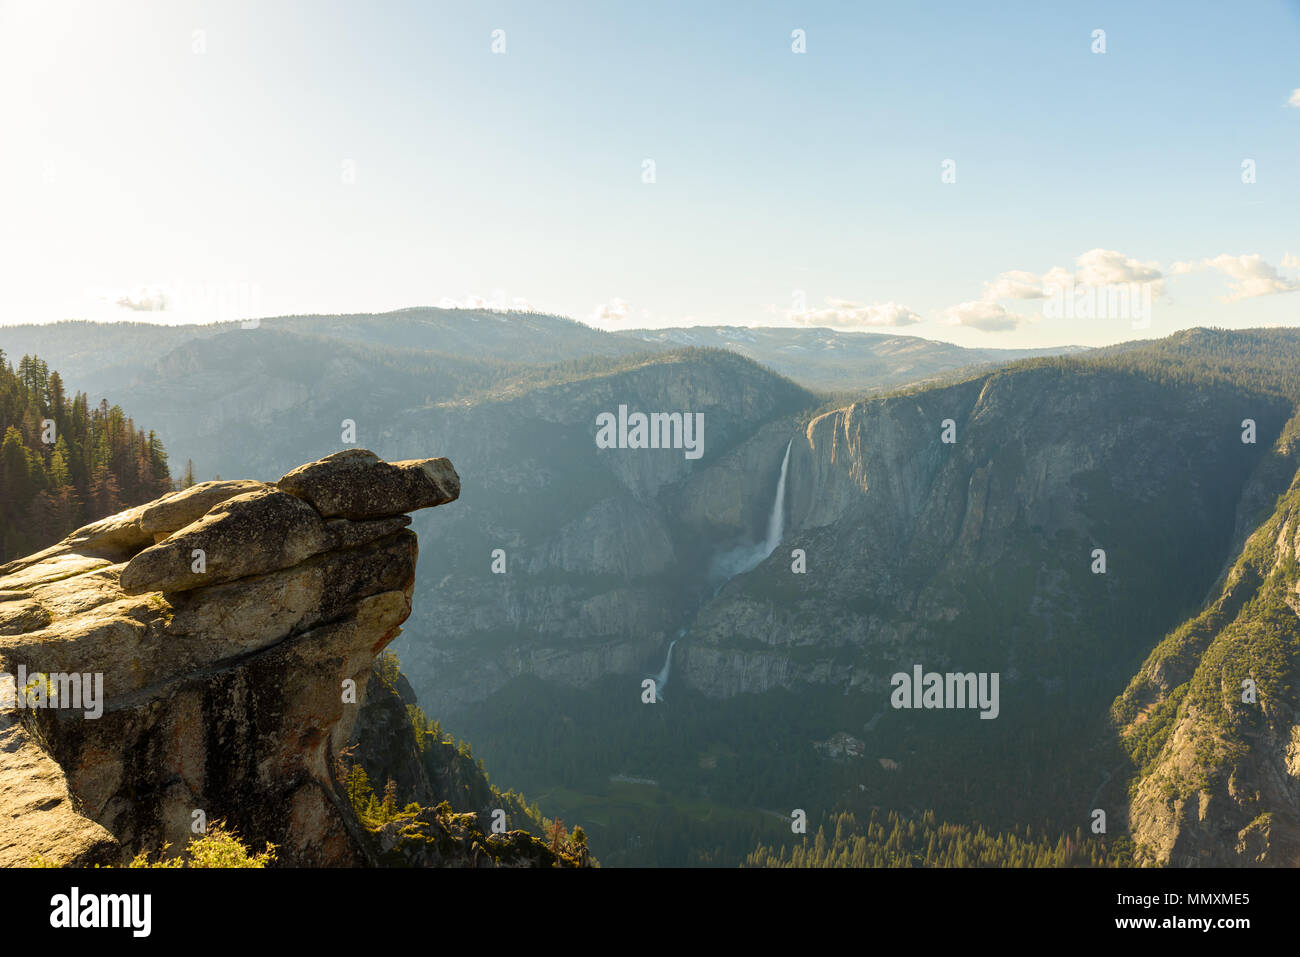 Upper and Lower Yosemite Falls in Yosemite National Park - View from Glacier View Point - California, USA Stock Photo